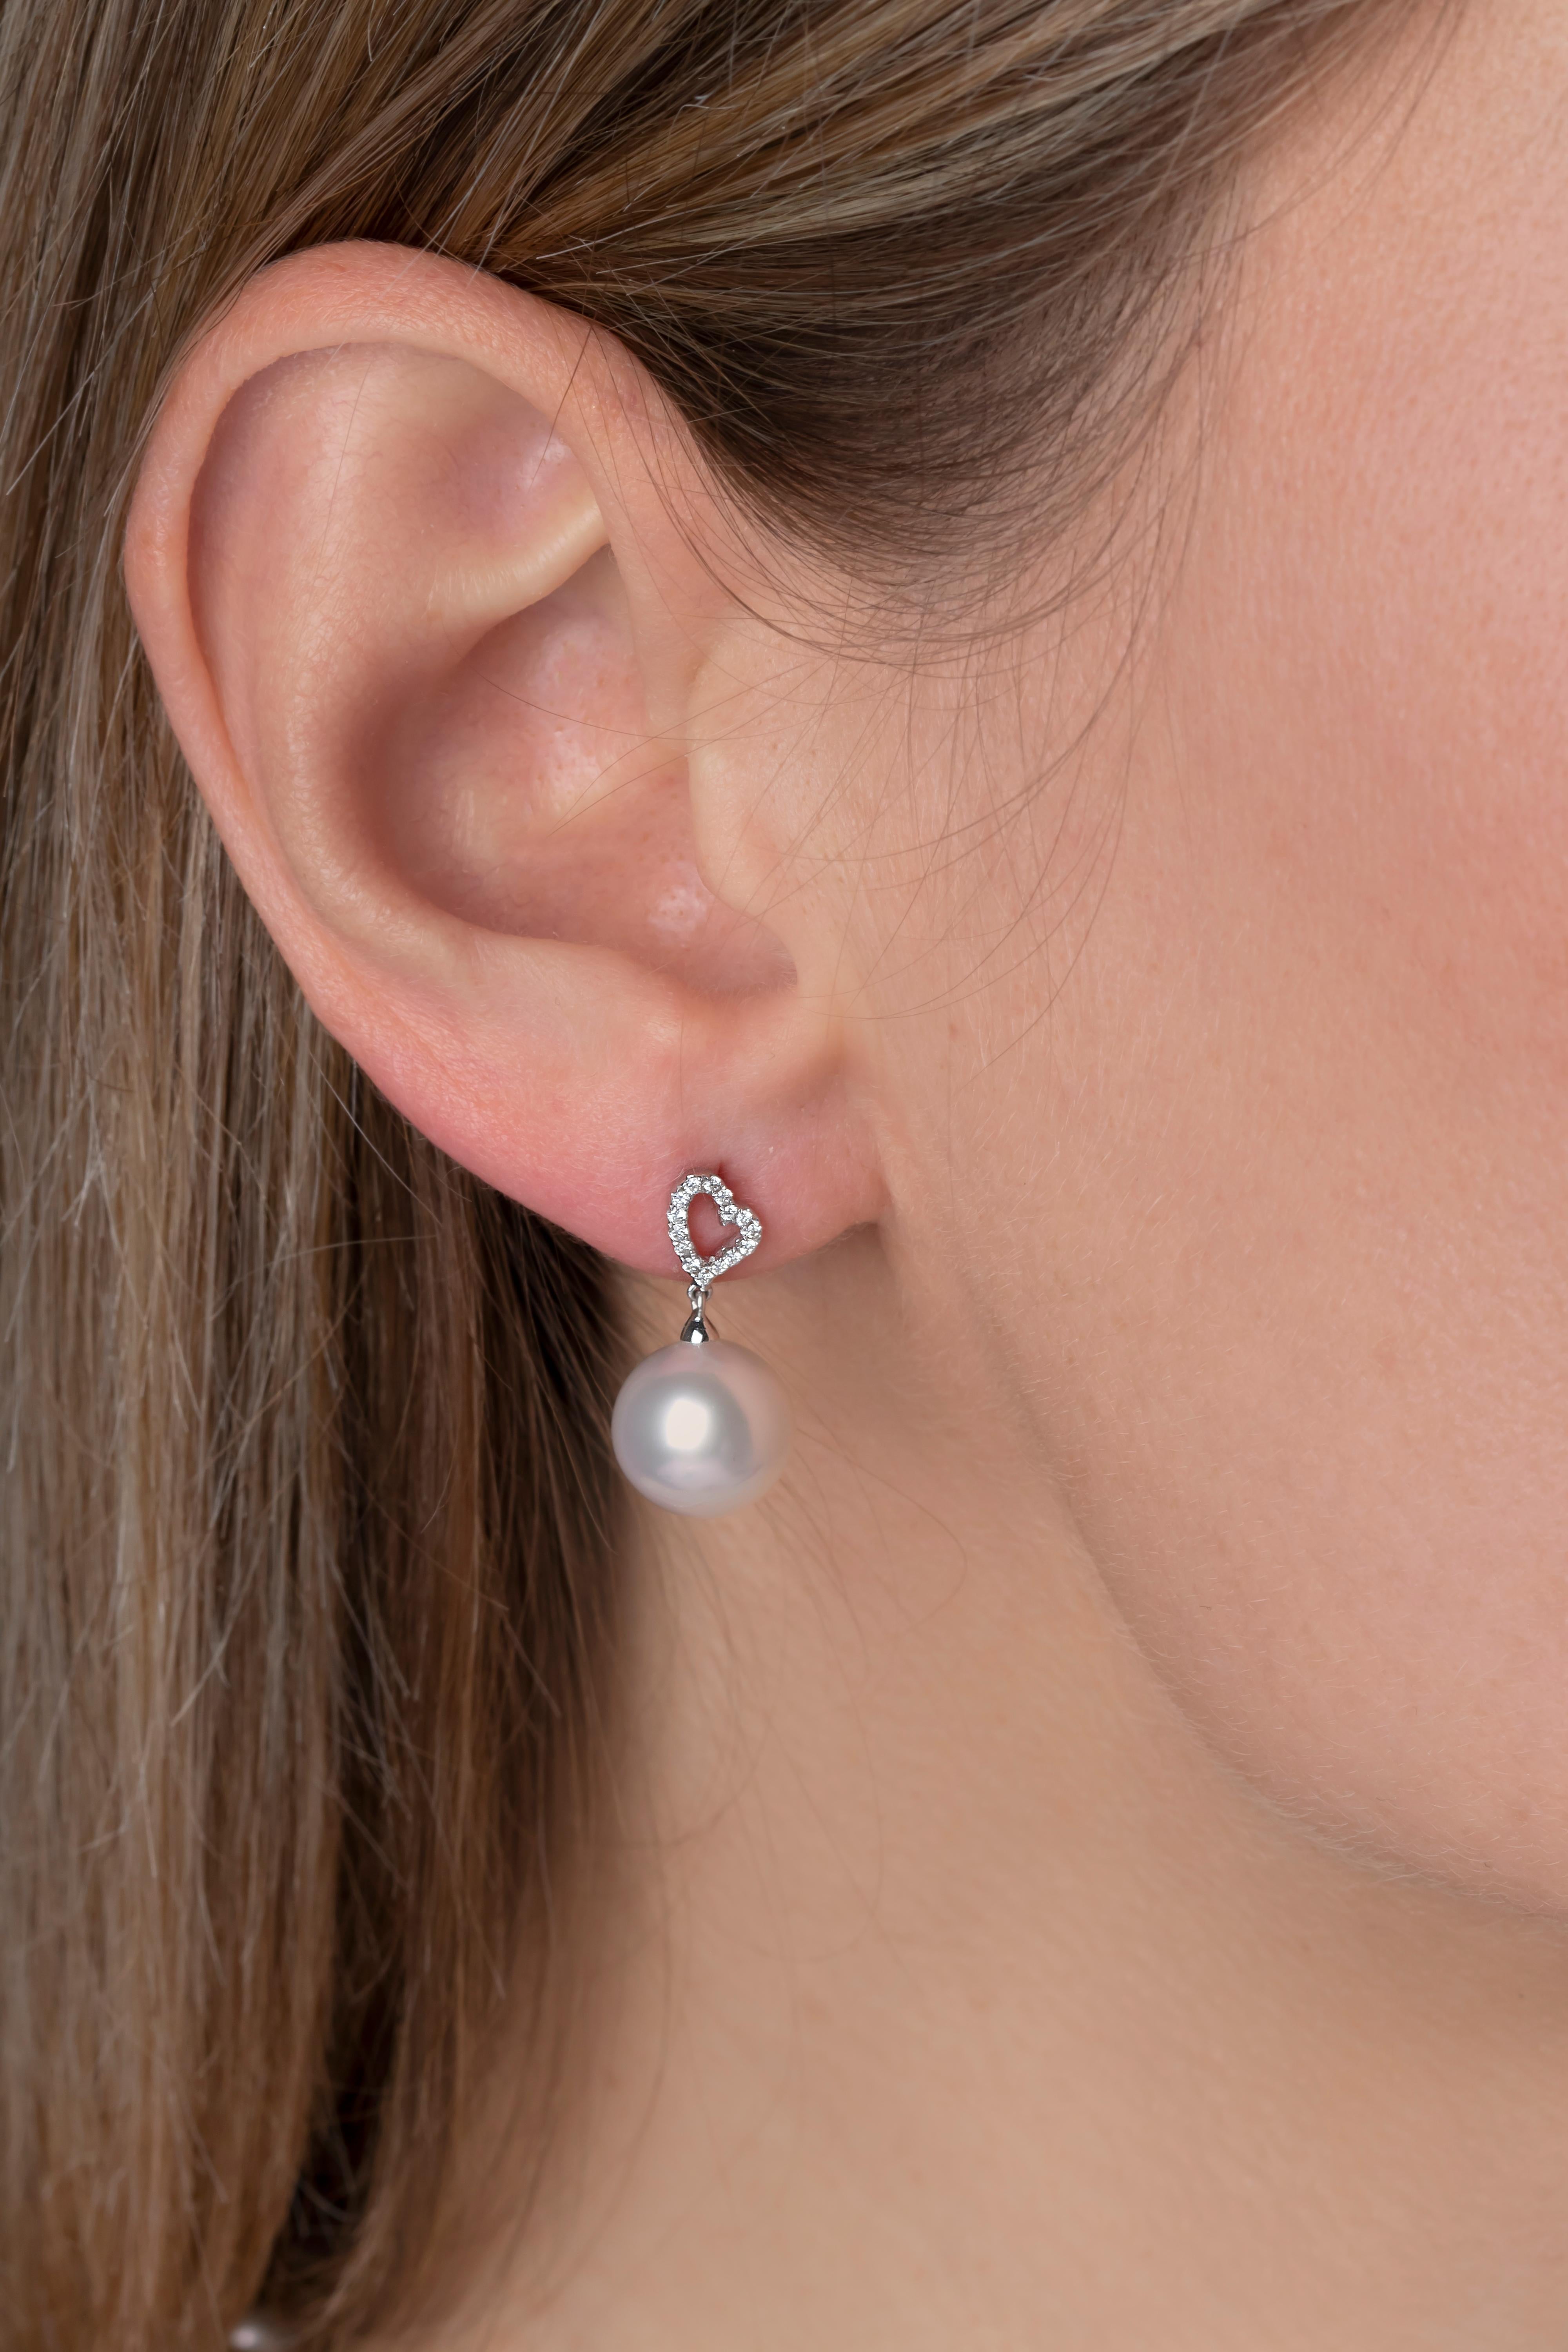 These intricate earrings by Yoko London feature lustrous South Sea pearls beneath a playful diamond heart motif. Contemporary and elegant, these earrings will add a touch of sophistication whenever they are worn. The perfect gift for a loved one,